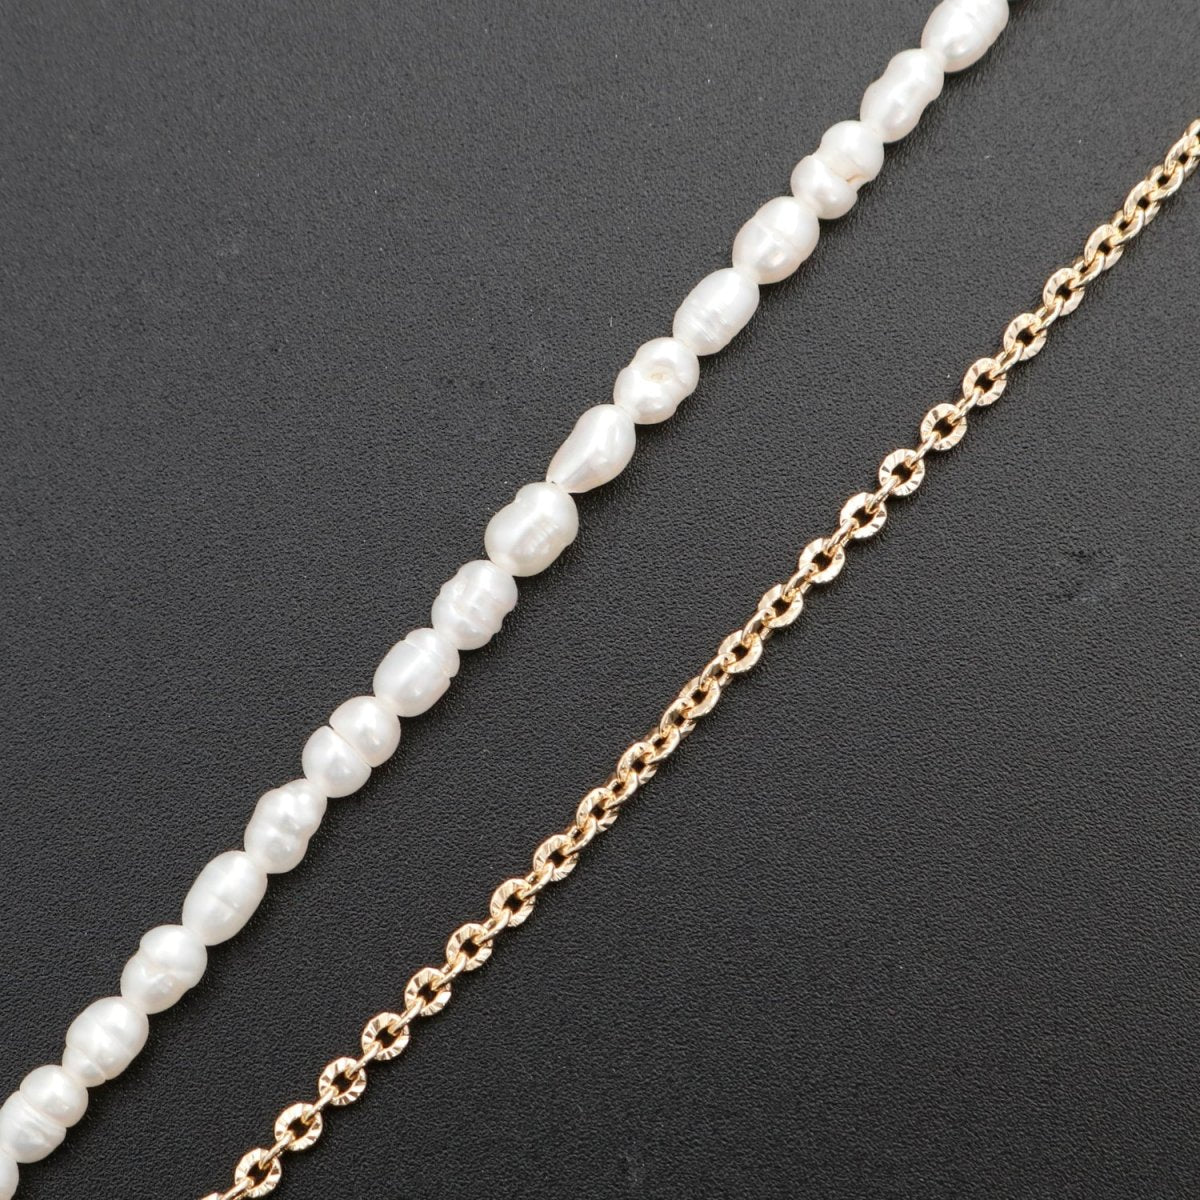 18k Gold Filled Freshwater Pearl Half Chain Necklace Cable Link 16 inch + 2" extender Length Handmade Minimalist Jewelry | WA-328 Clearance Pricing - DLUXCA